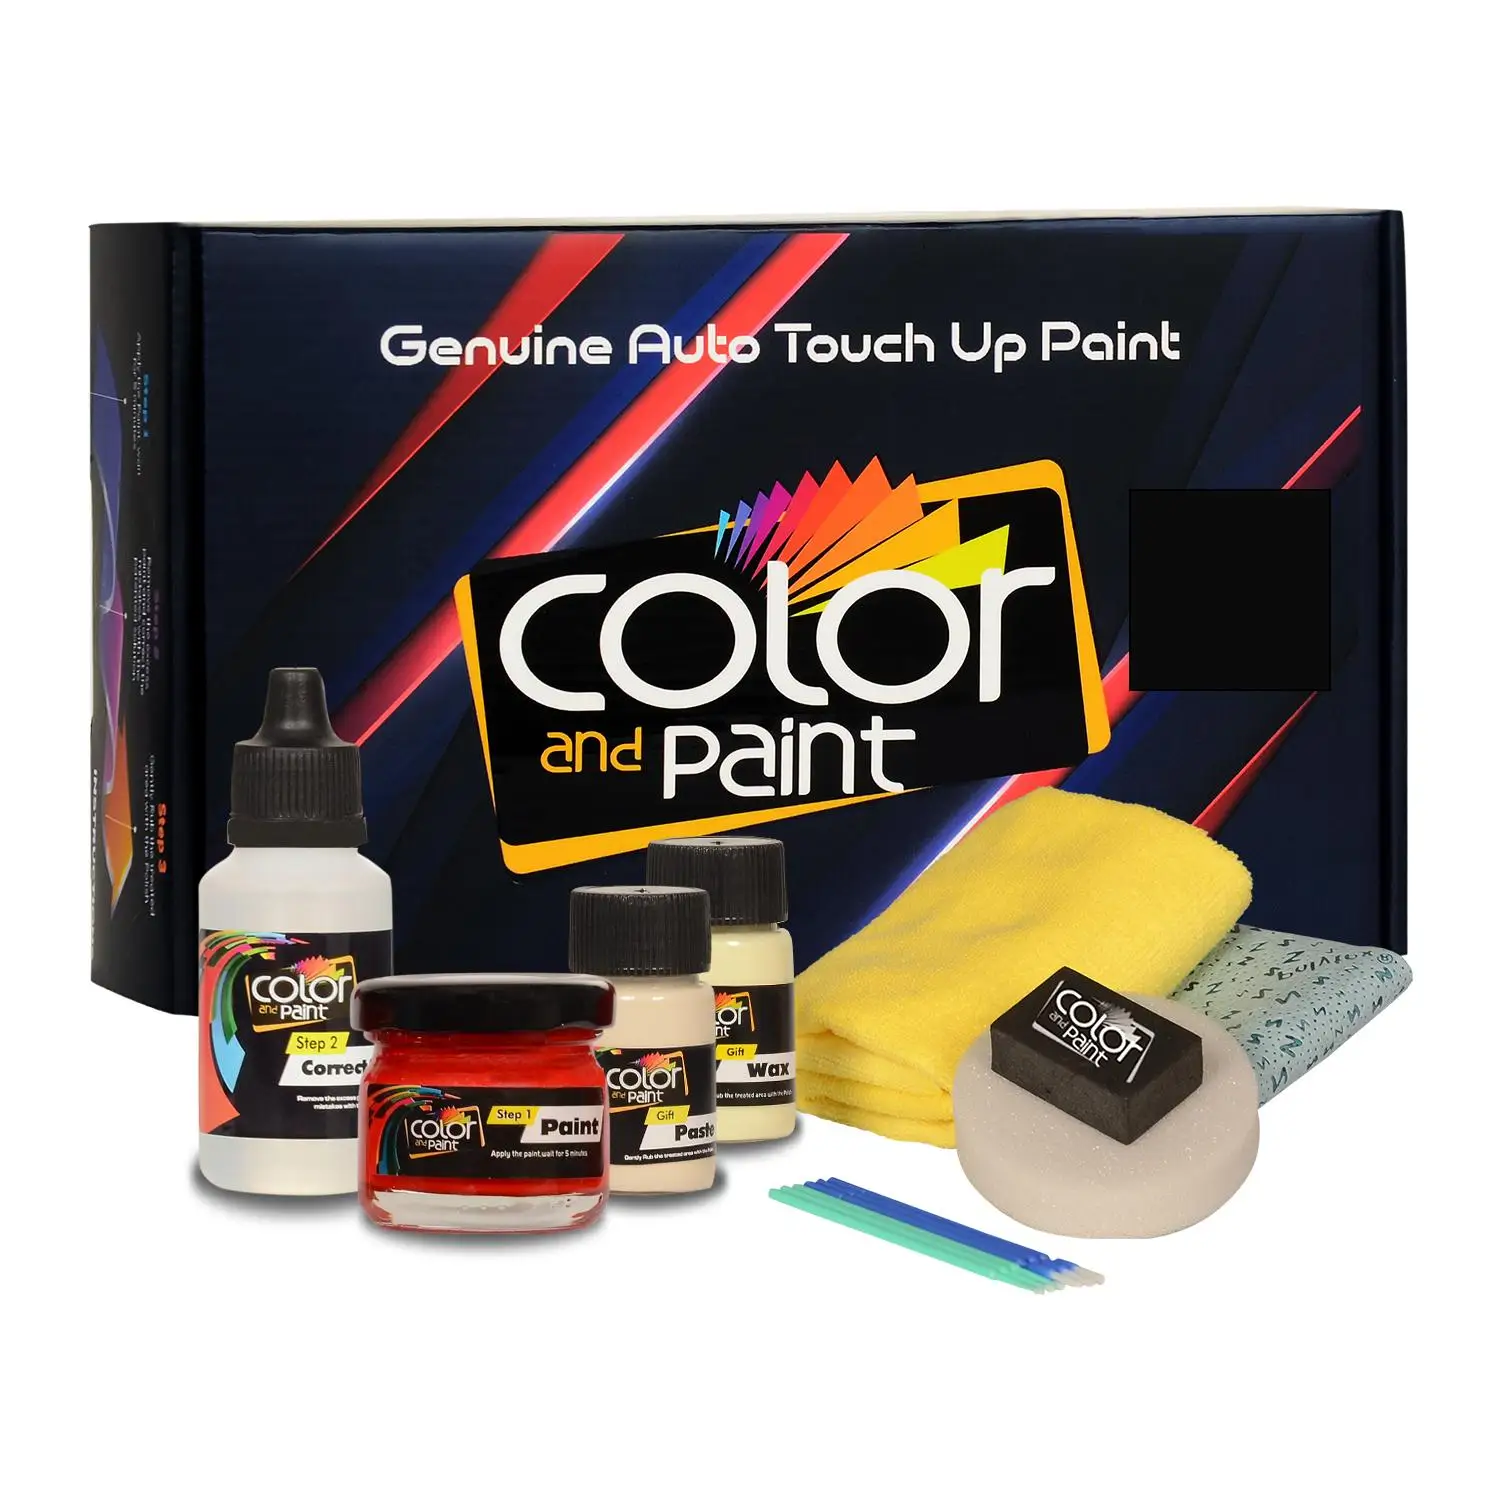 

Color and Paint compatible with Daewoo Automotive Touch Up Paint - GRANADA BLACK PEARL MET EW-83L-Basic Care